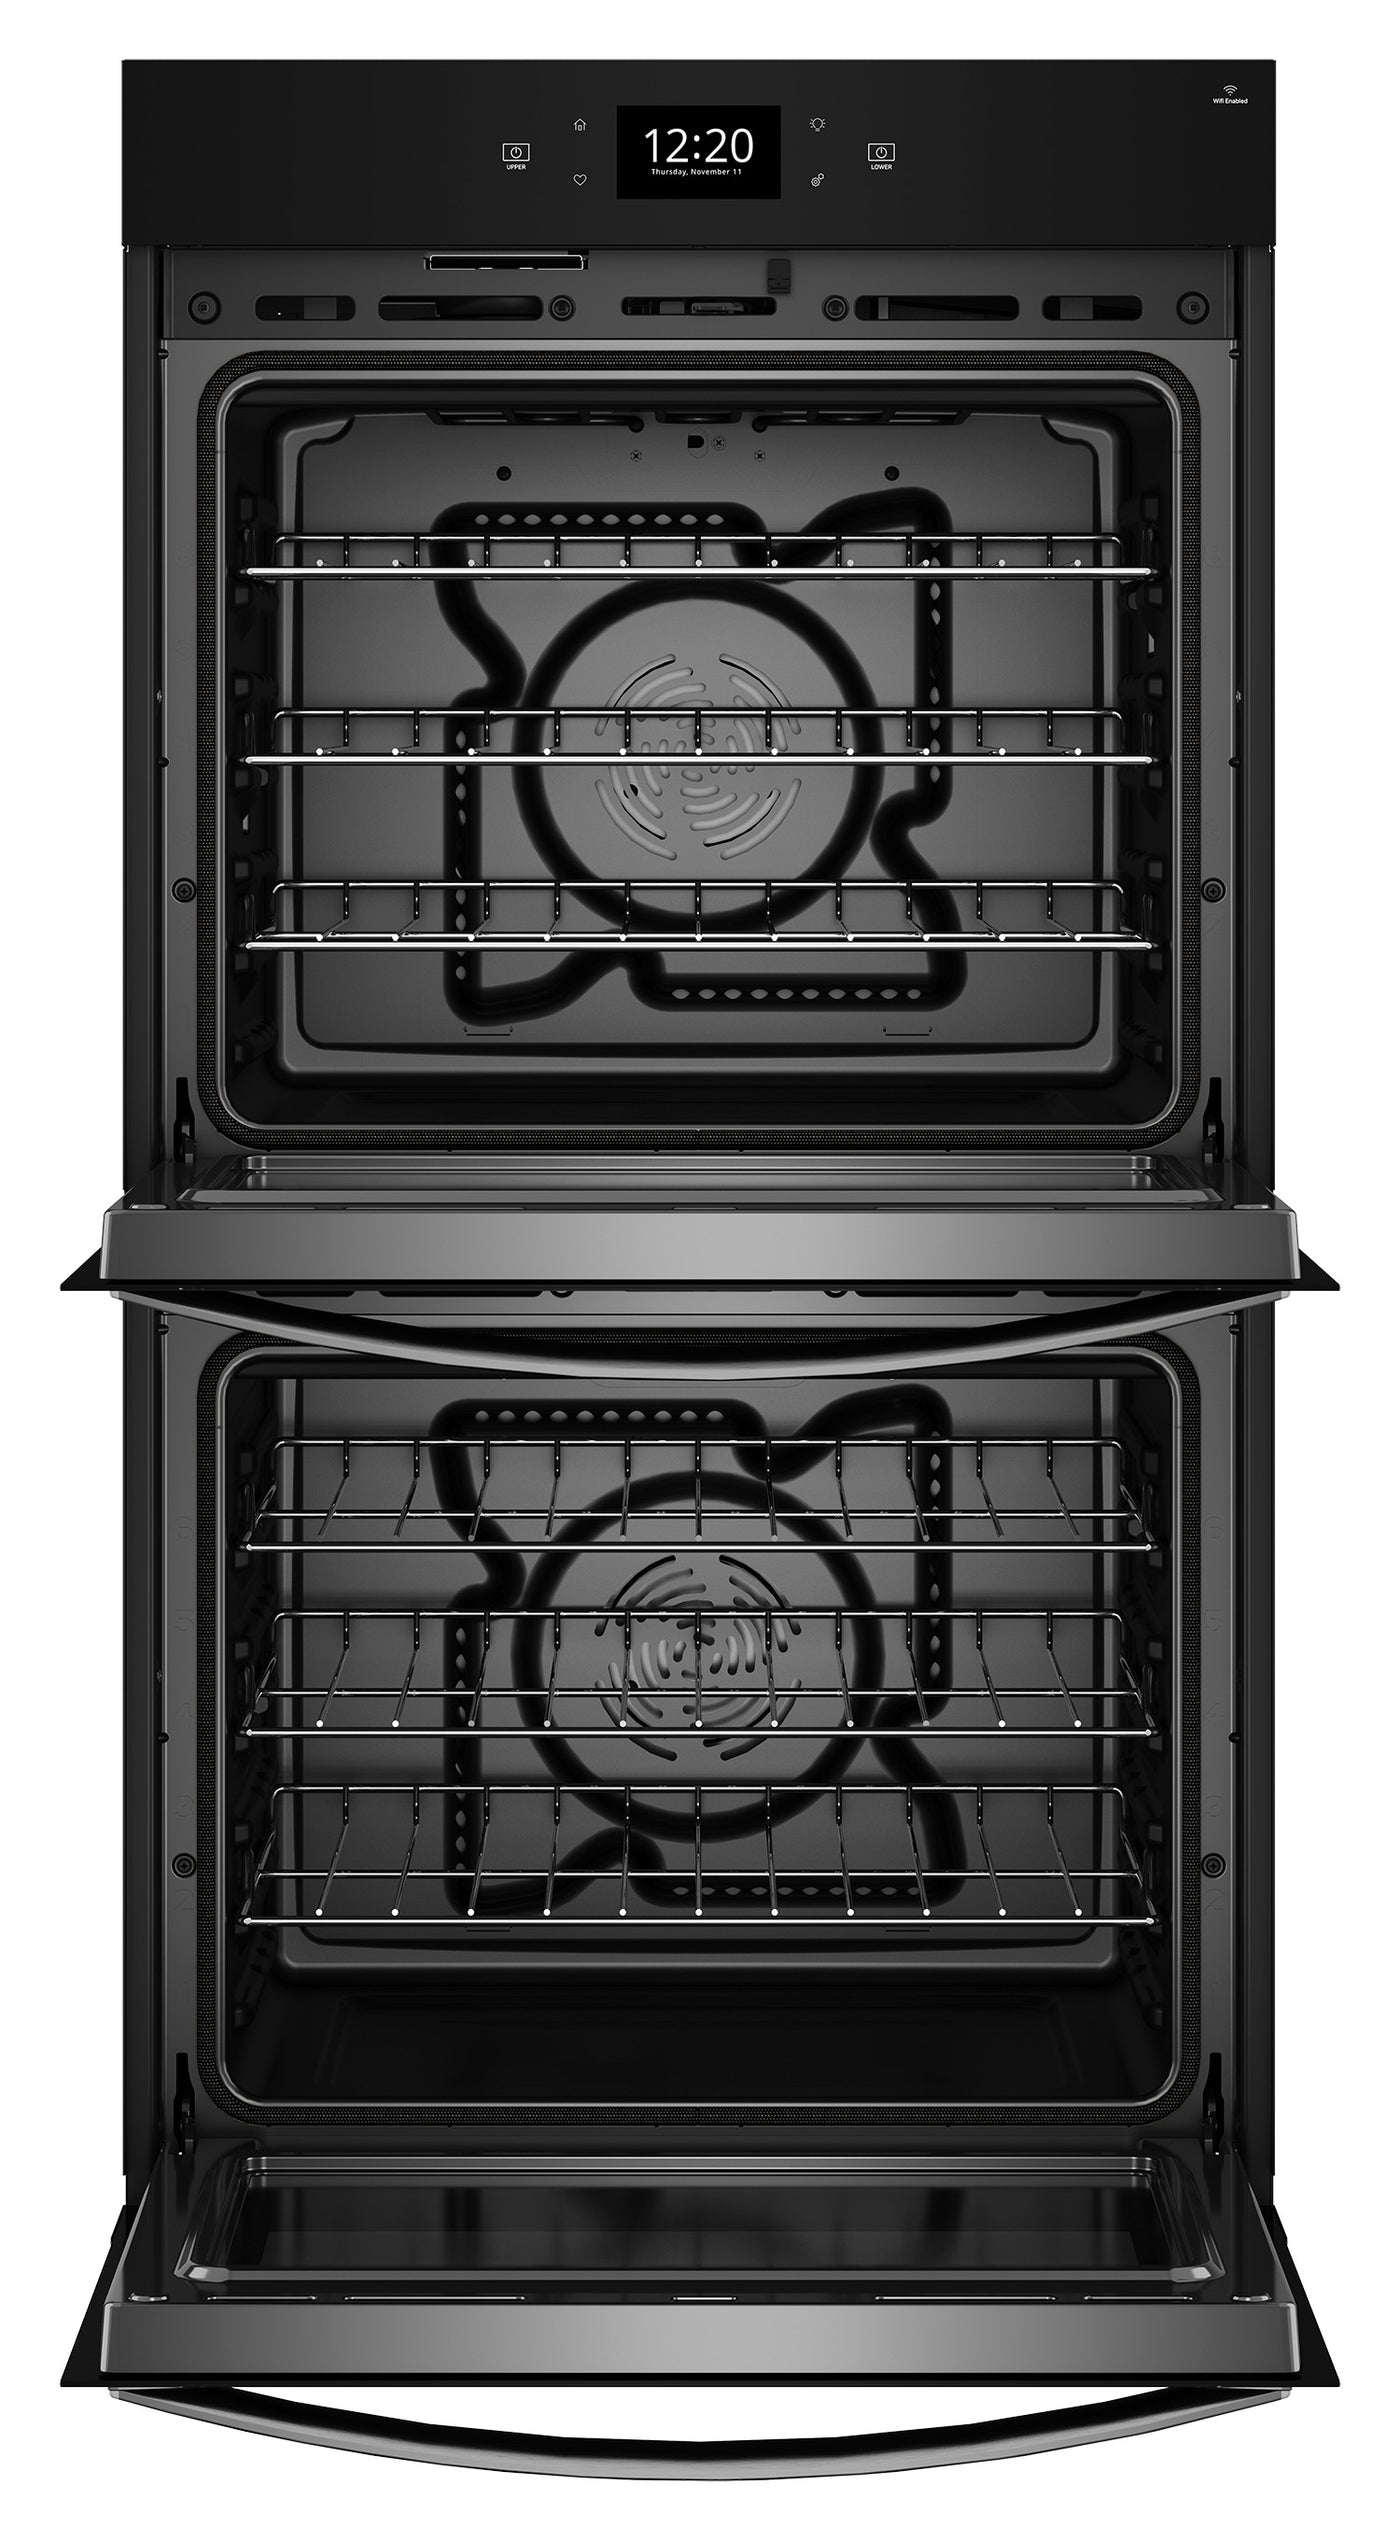 Whirlpool Fingerprint Resistant Stainless Steel Double Wall Oven (8.60 Cu Ft) - WOED7027PZ